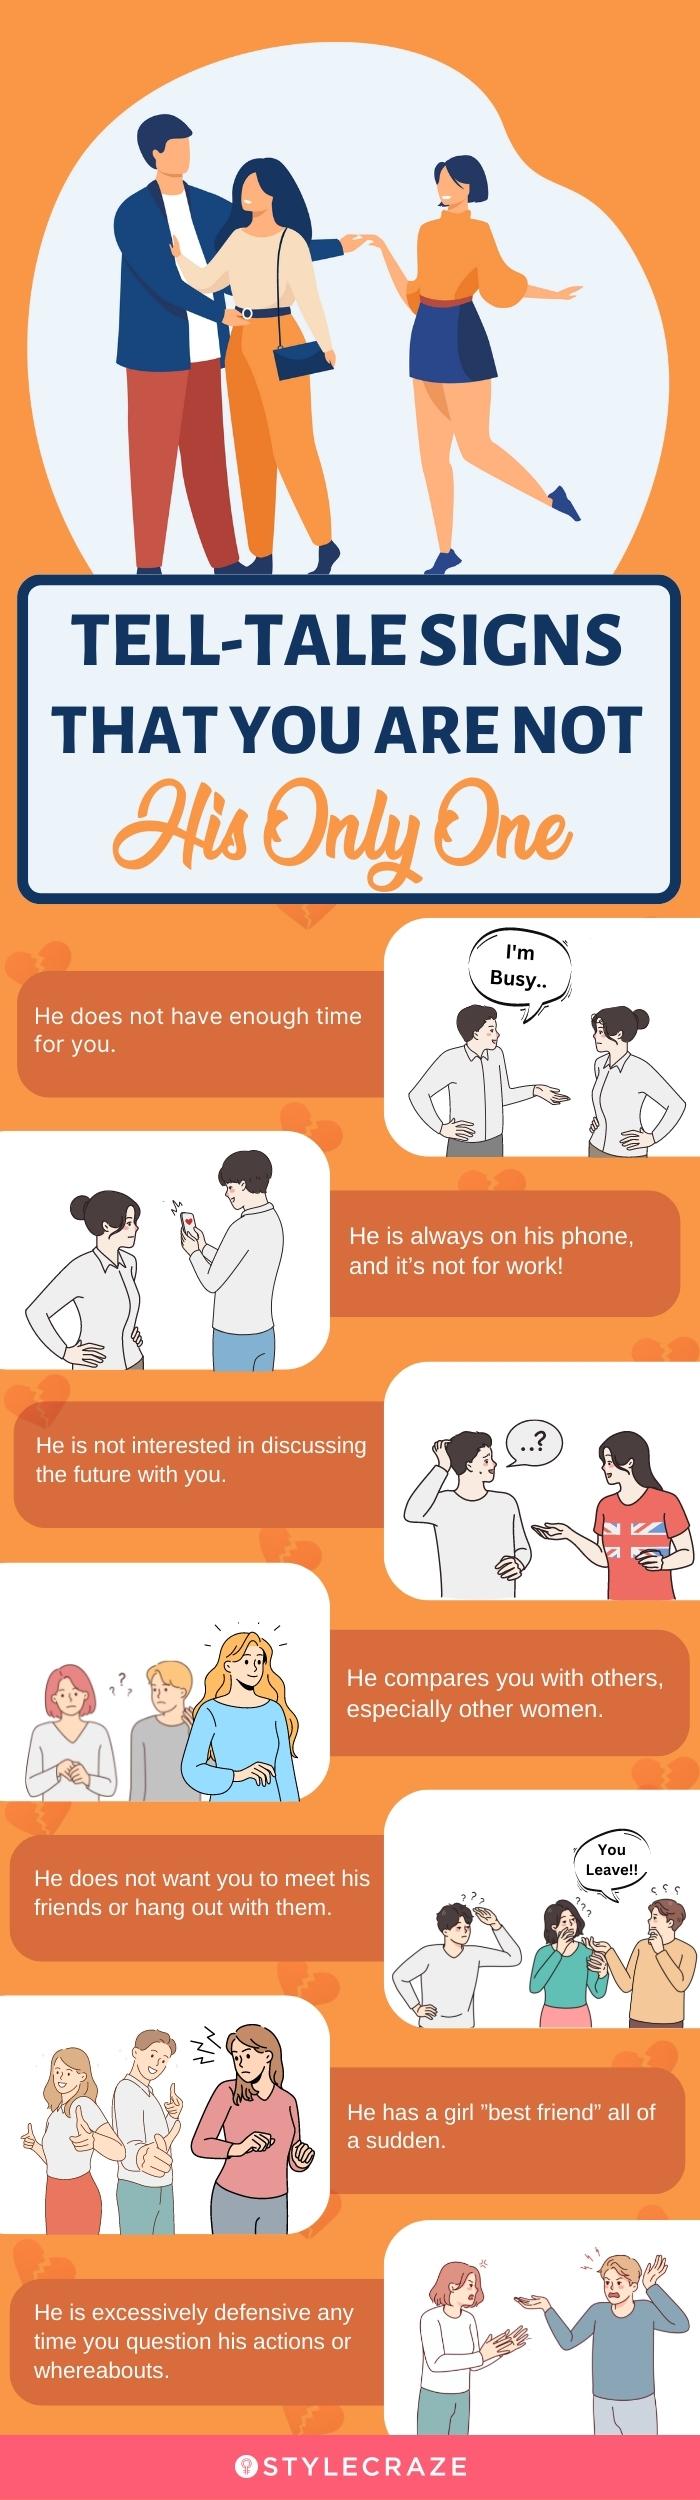 tell tale signs that you are not his only one (infographic)